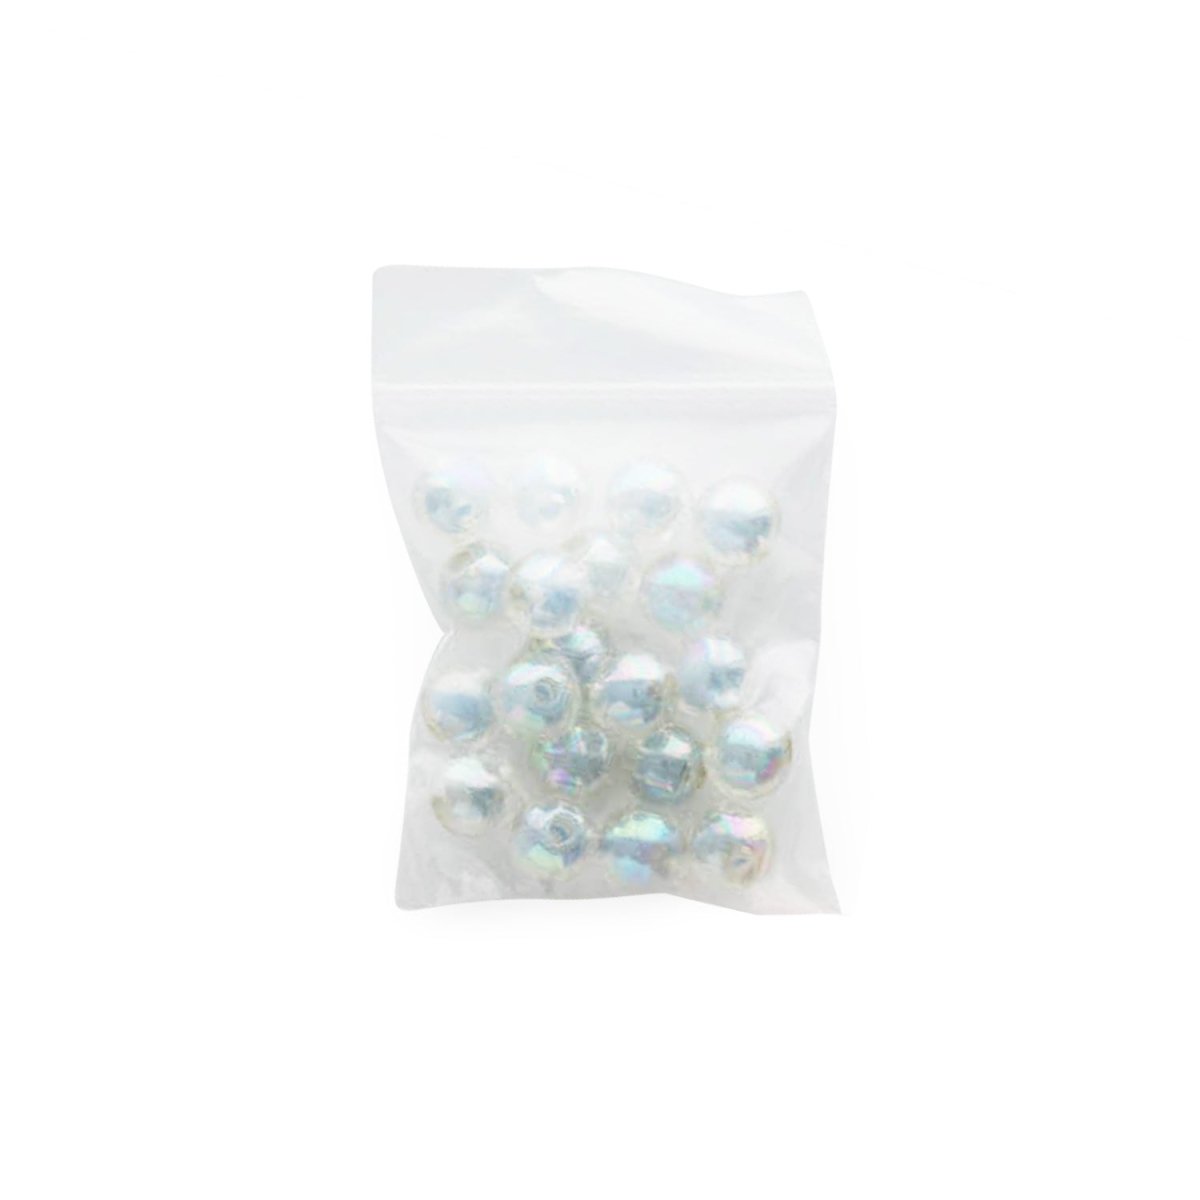 Acrylic Round Beads Double Bead 10mm Blue AB from Cara & Co Craft Supply